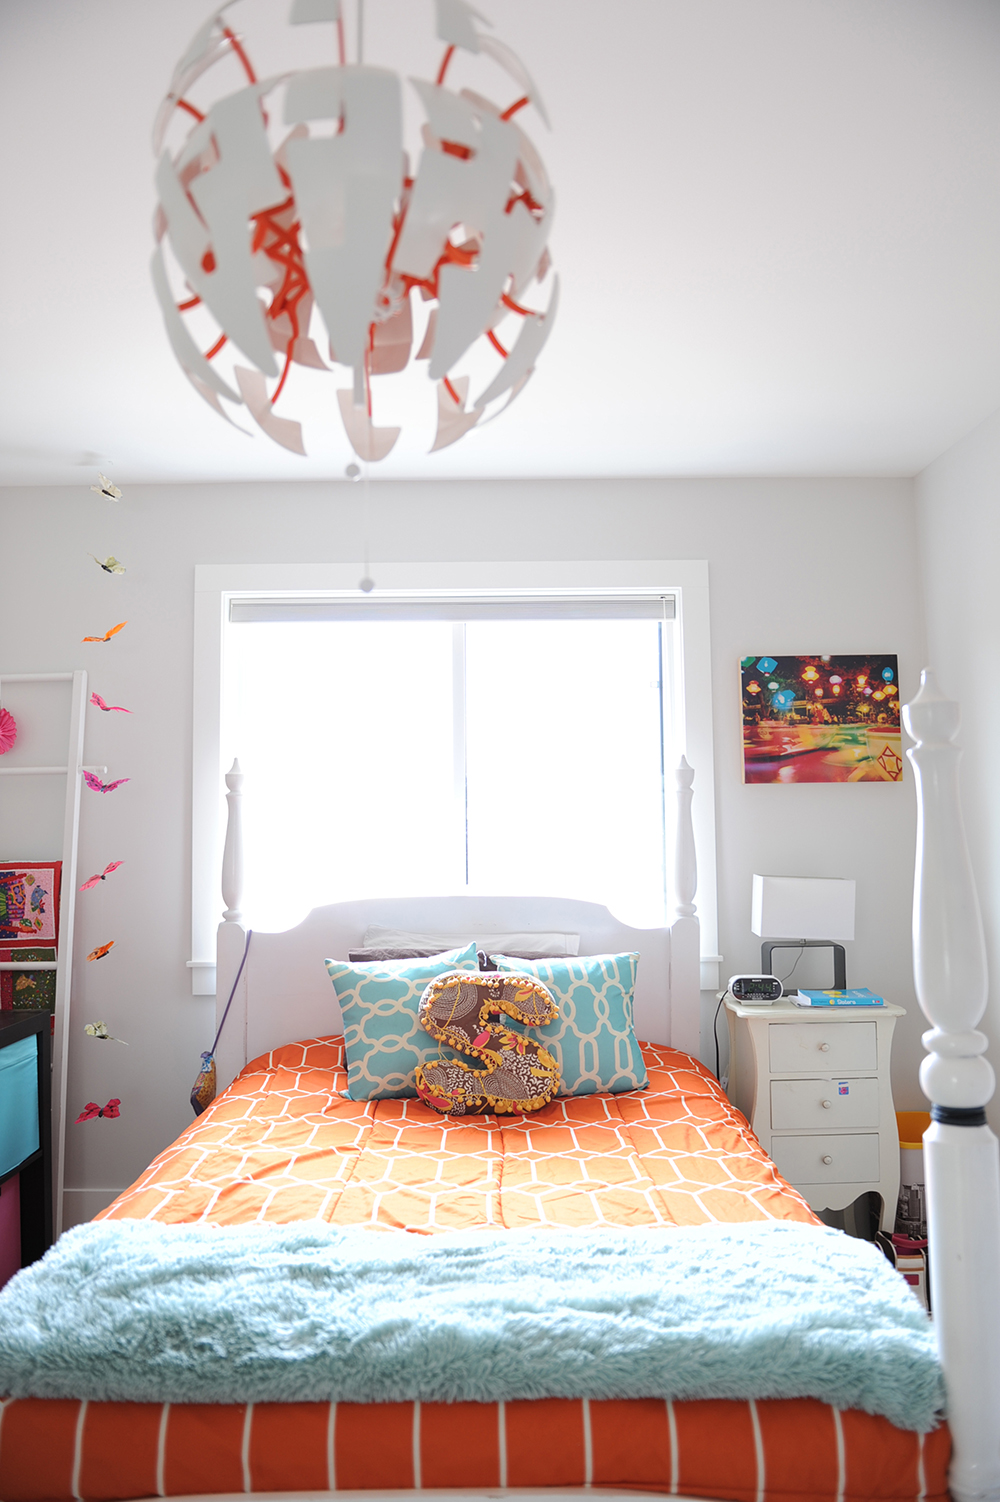 Kaya's bedroom is a medley of magical colours and patterns.